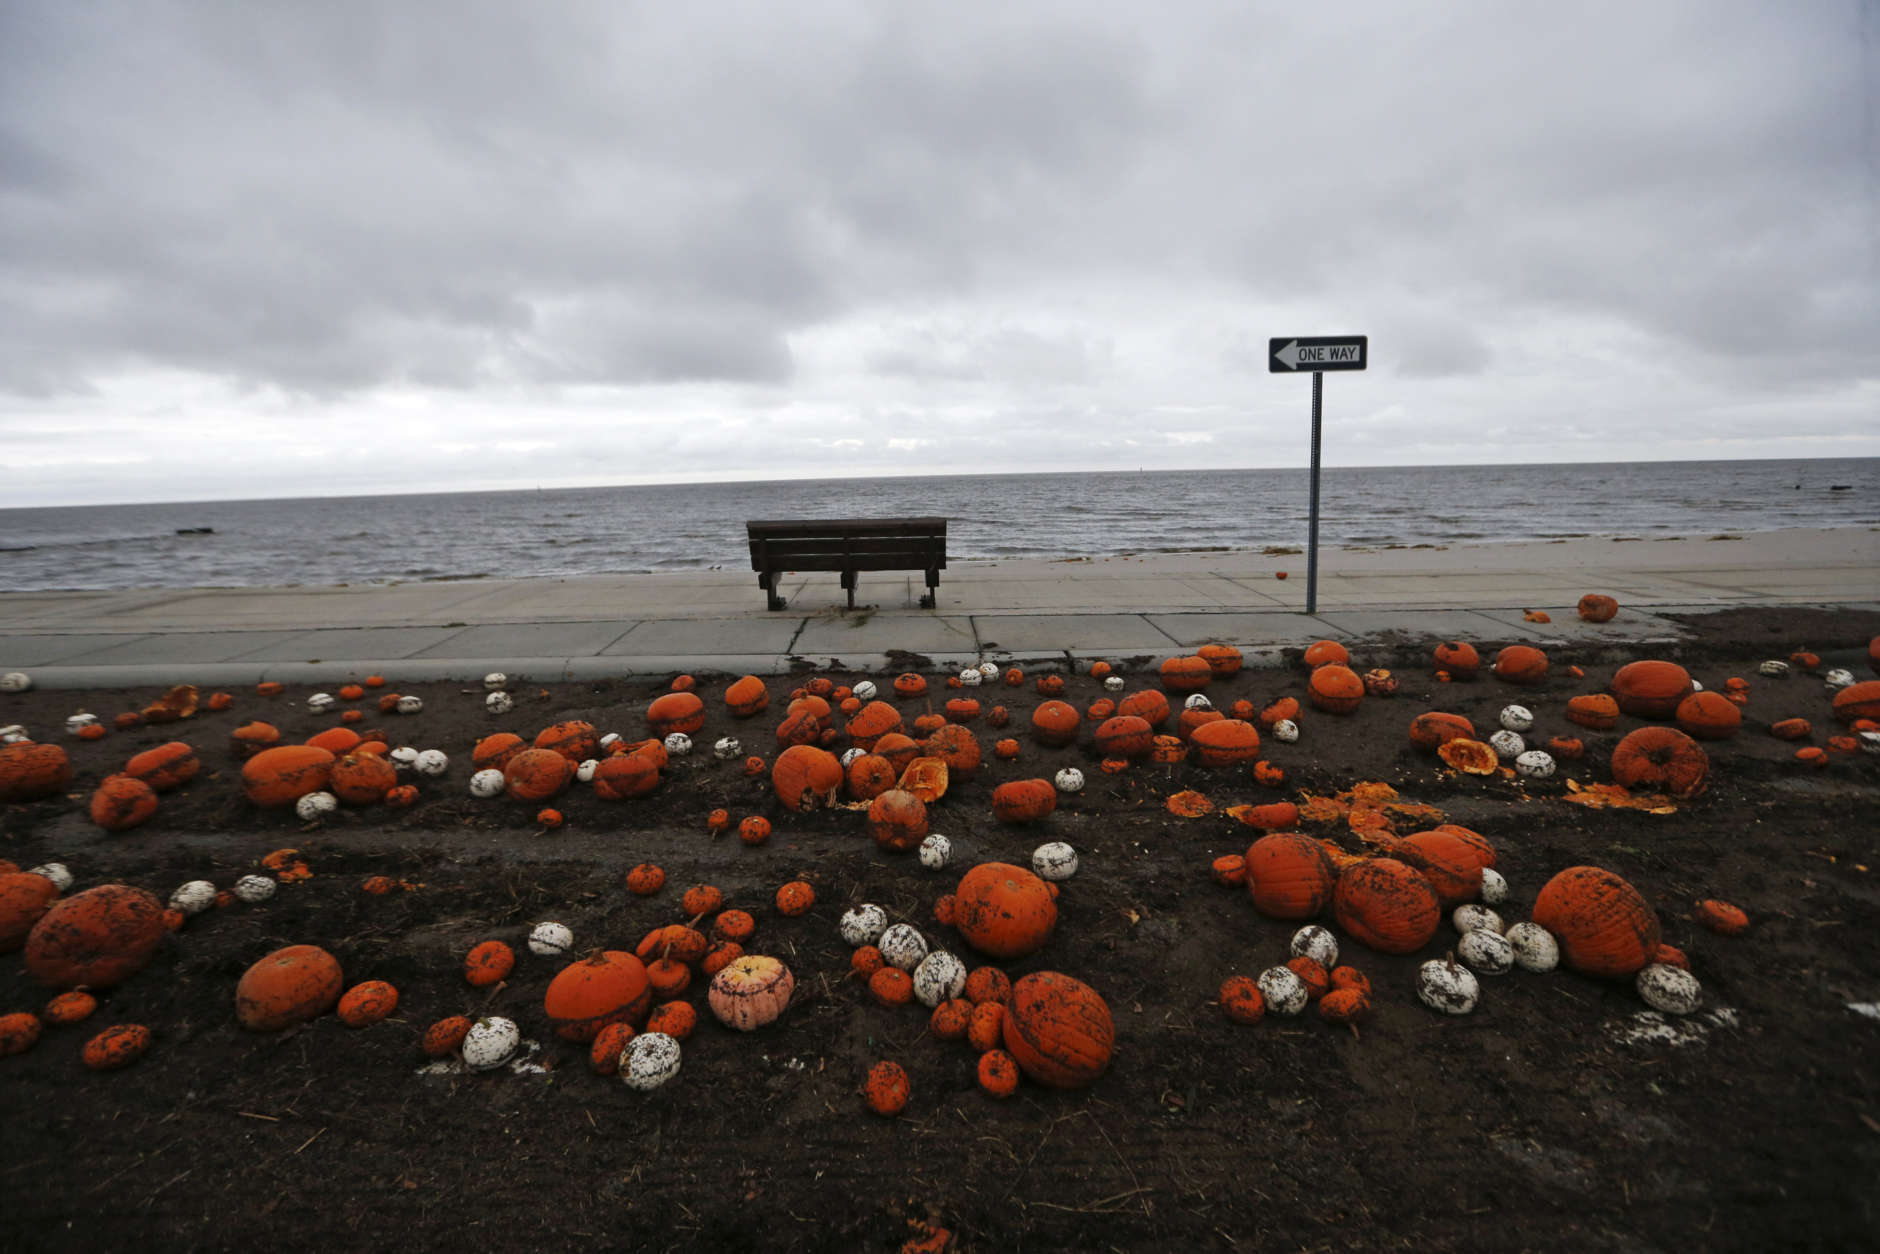 Pumpkins are strewn along the Gulf of Mexico in Pass Christian, Miss., in the aftermath of Hurricane Nate, Sunday, Oct. 8, 2017. (AP Photo/Gerald Herbert)